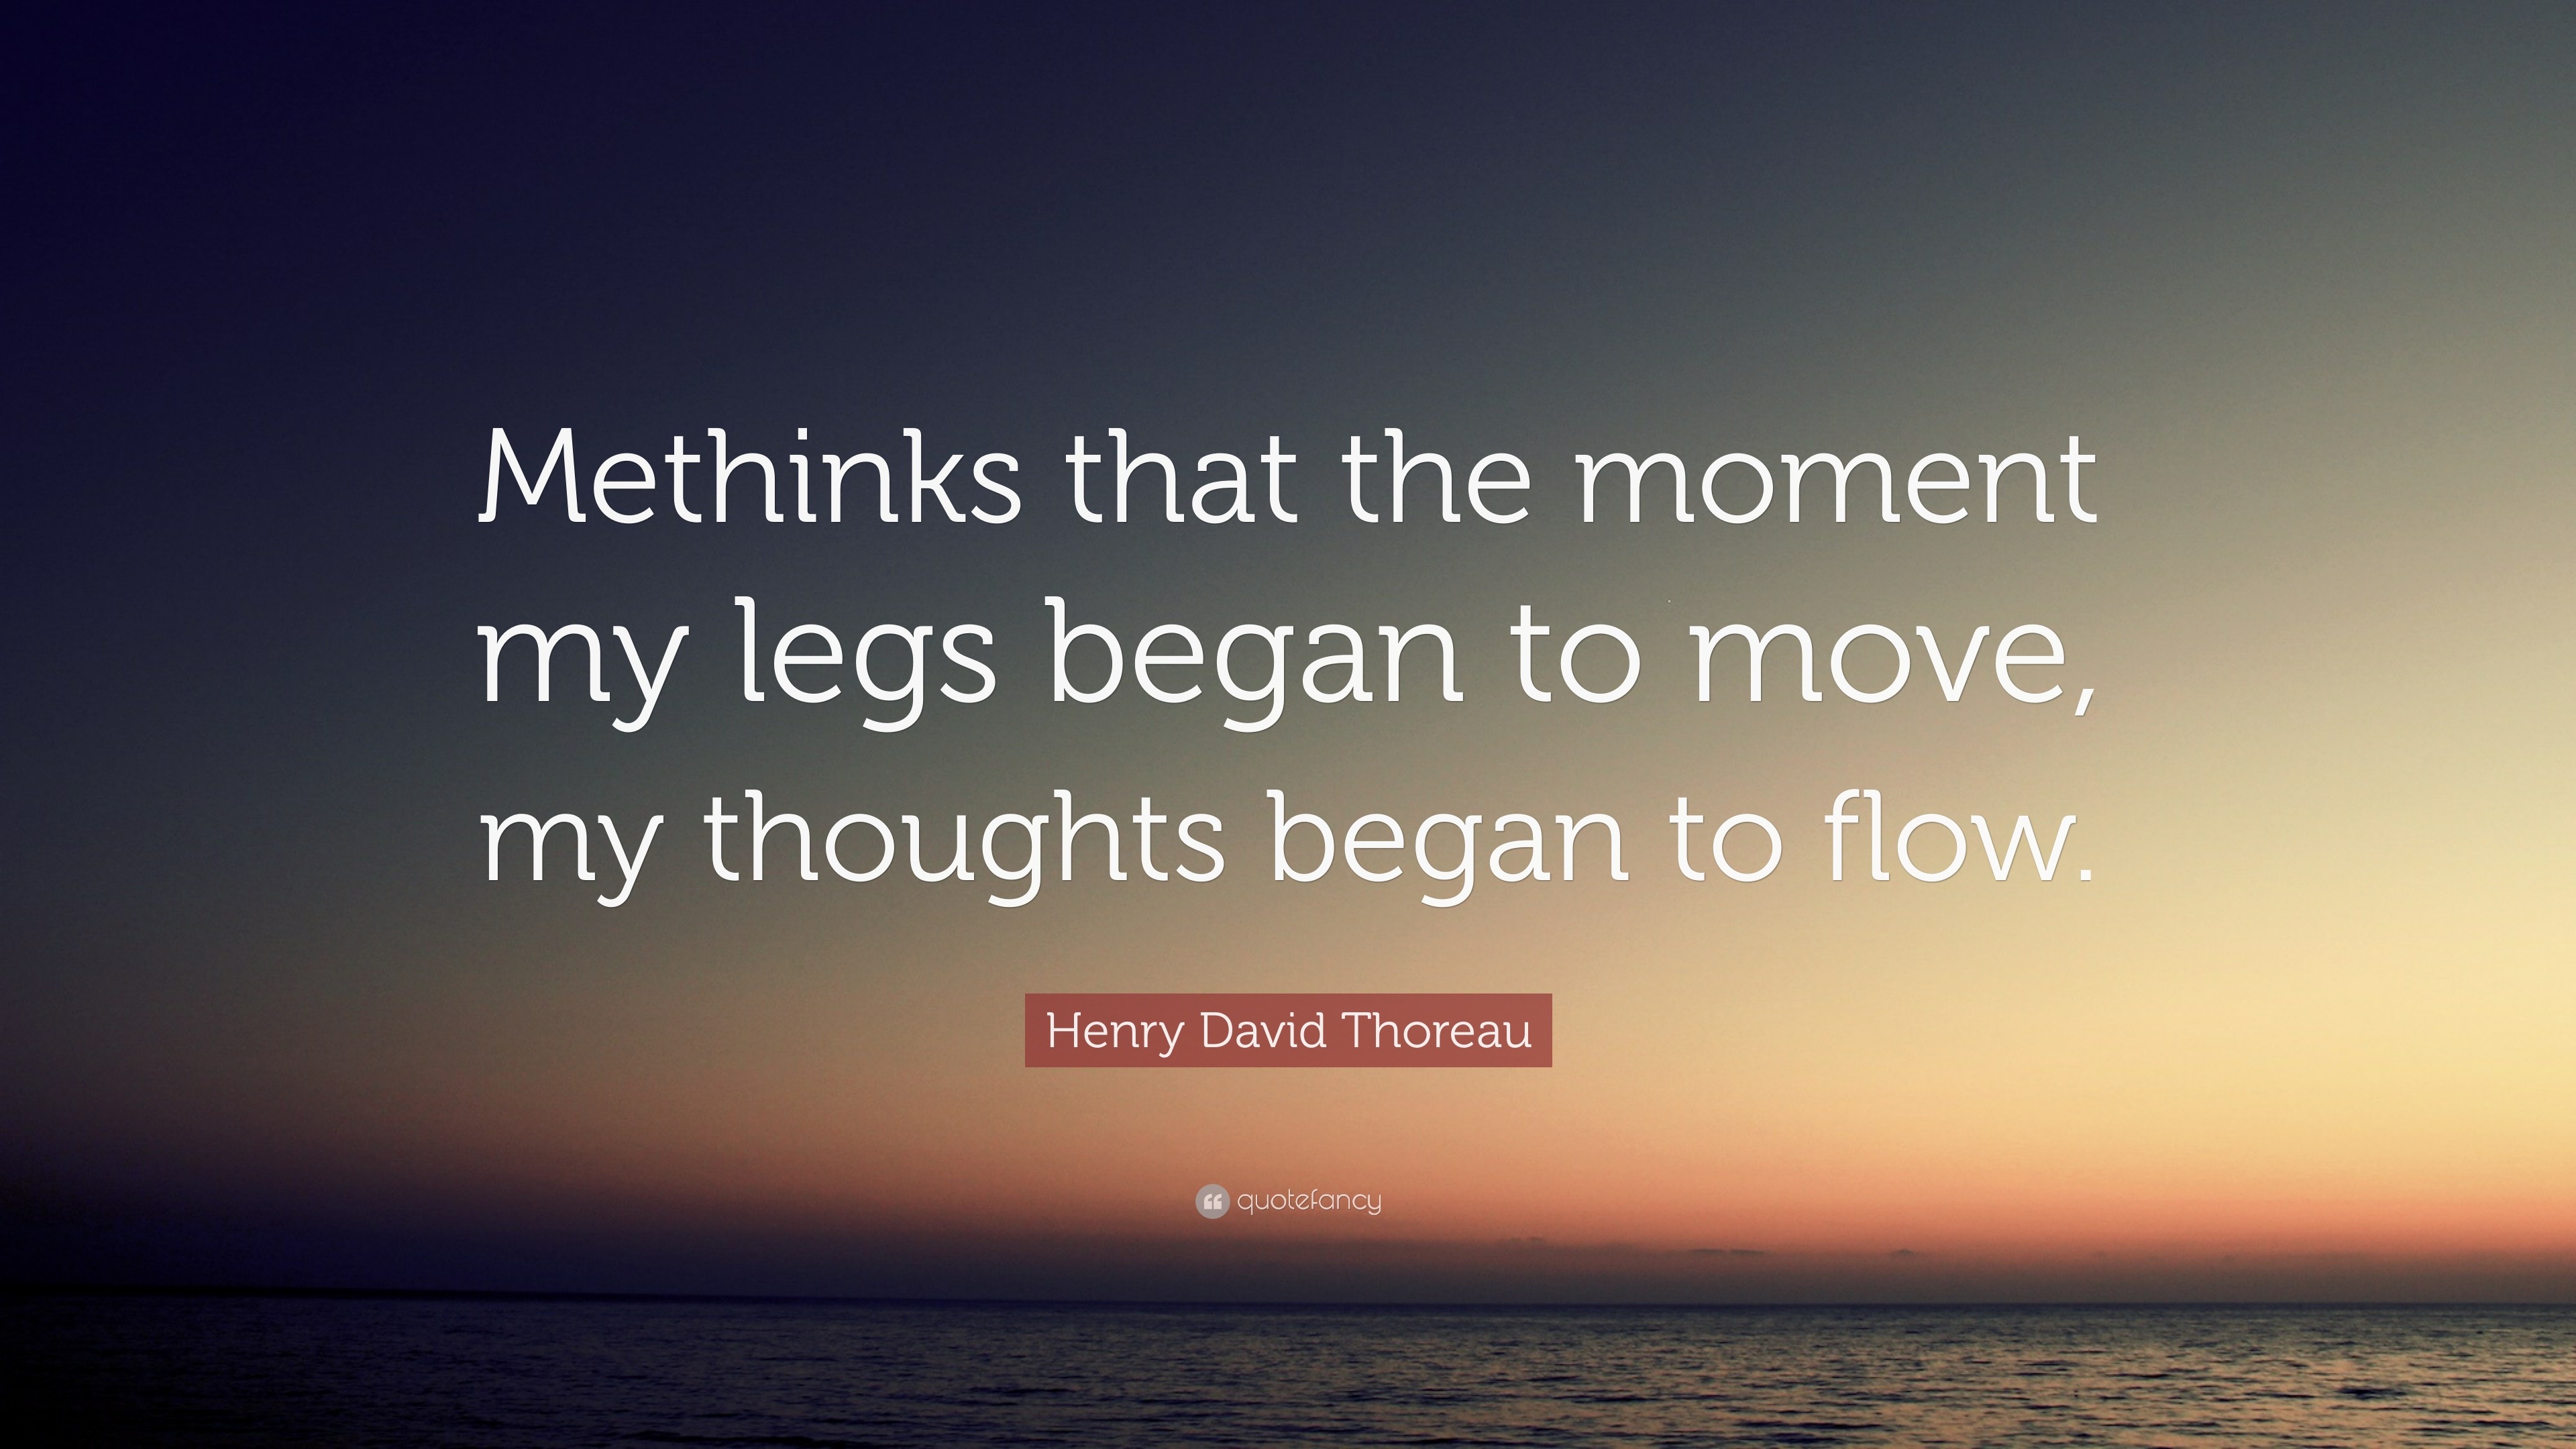 Henry David Thoreau Quote: “Methinks that the moment my legs began to ...